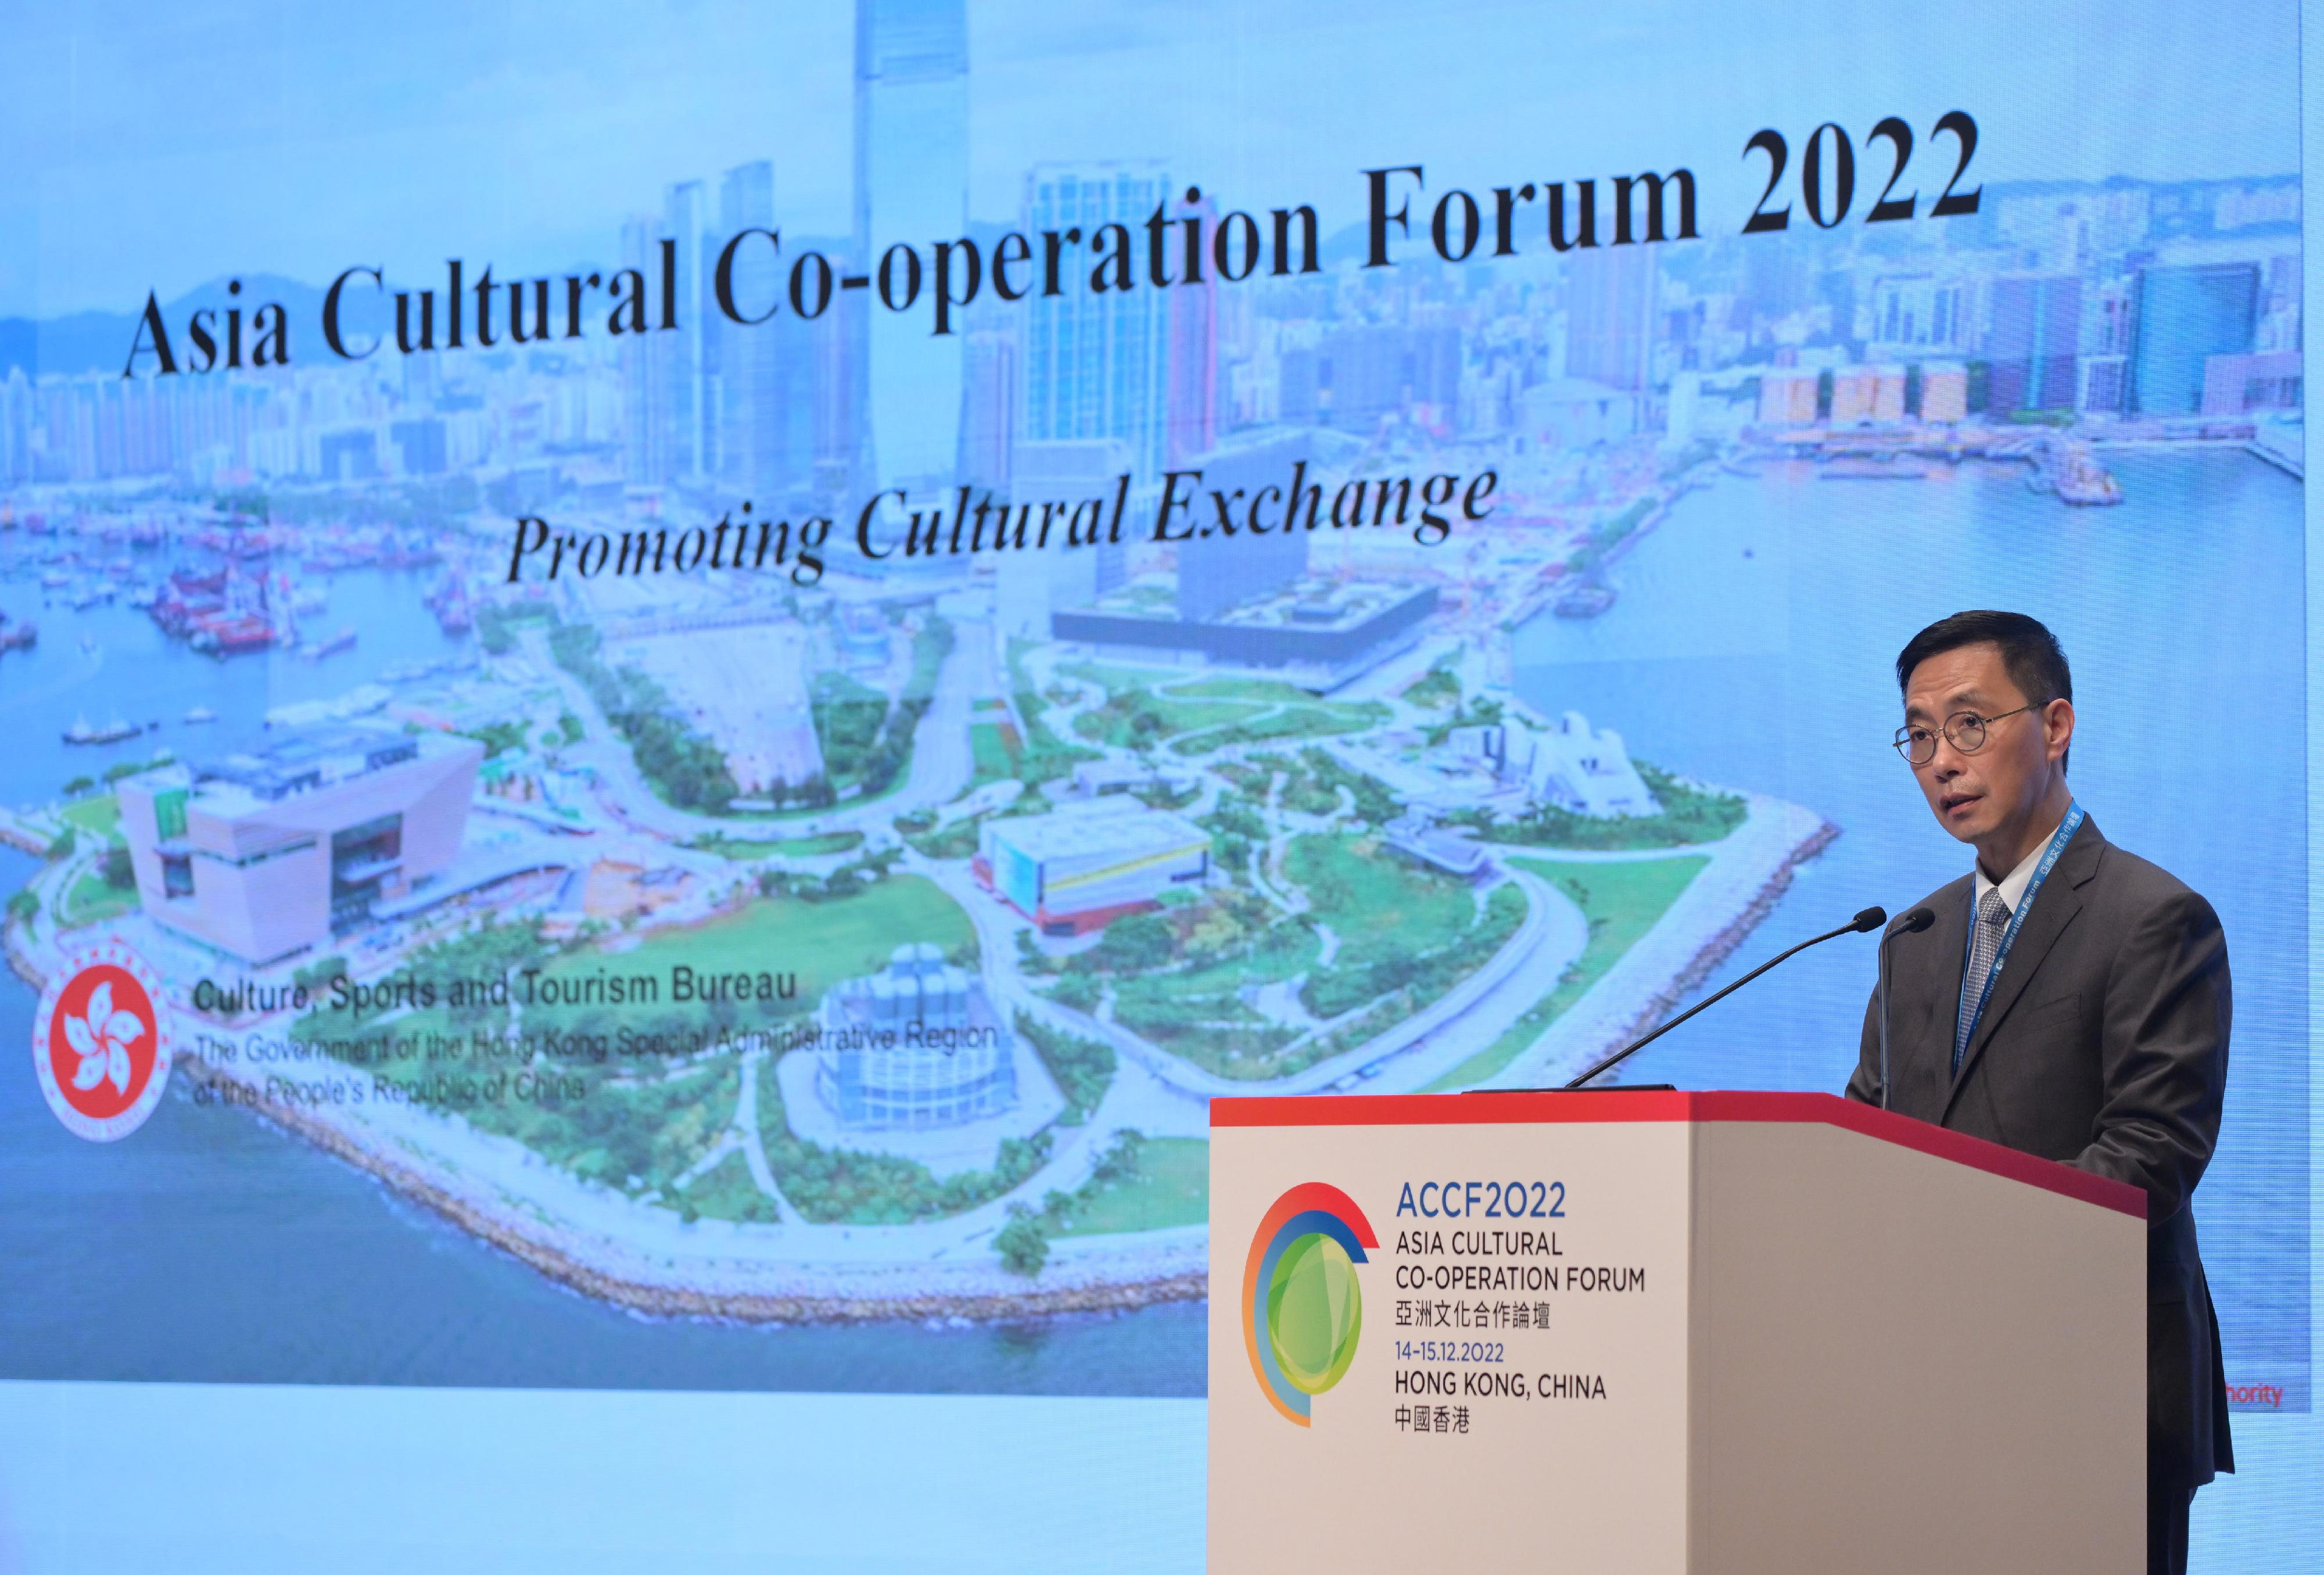 The Secretary for Culture, Sports and Tourism, Mr Kevin Yeung, delivers a speech at the Asia Cultural Co-operation Forum 2022 Hybrid Ministerial Panel today (December 14).